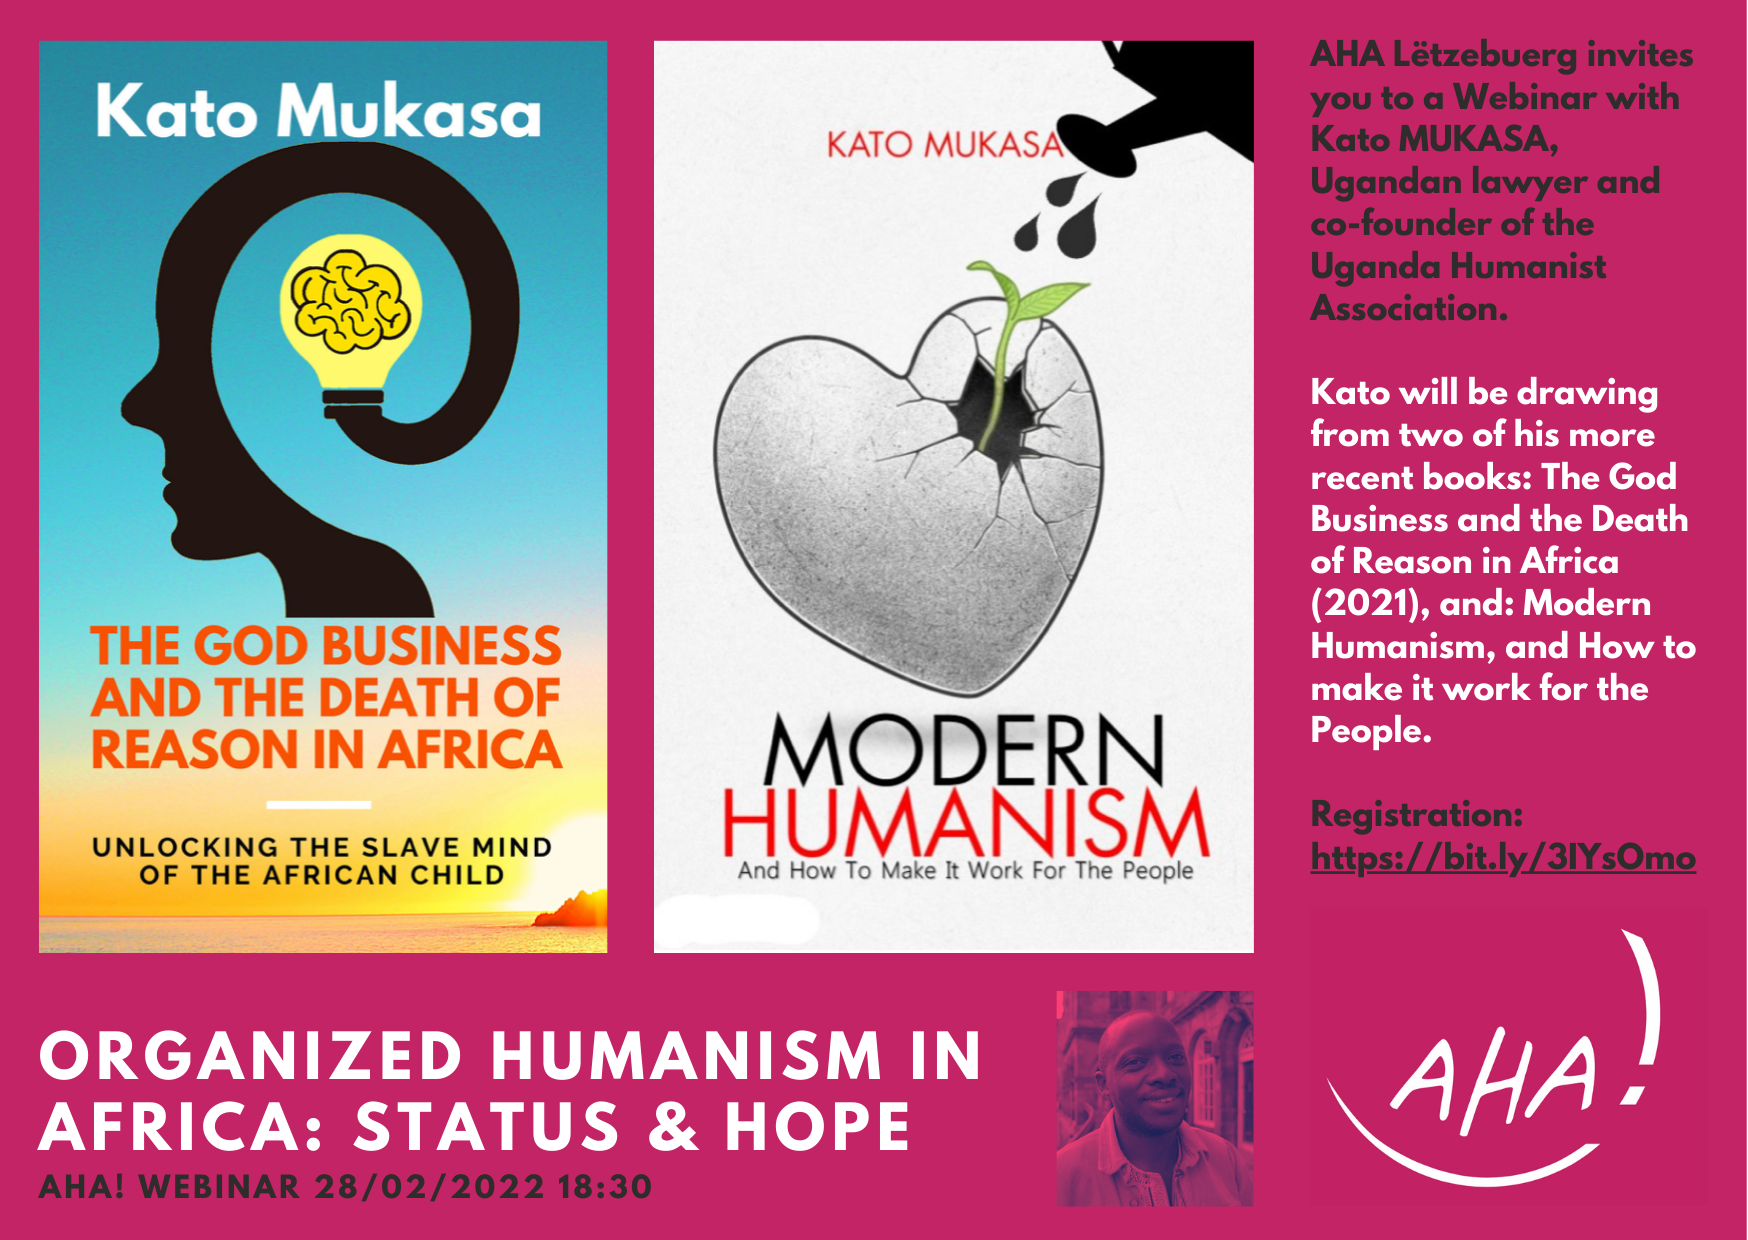 Organized Humanism in Africa